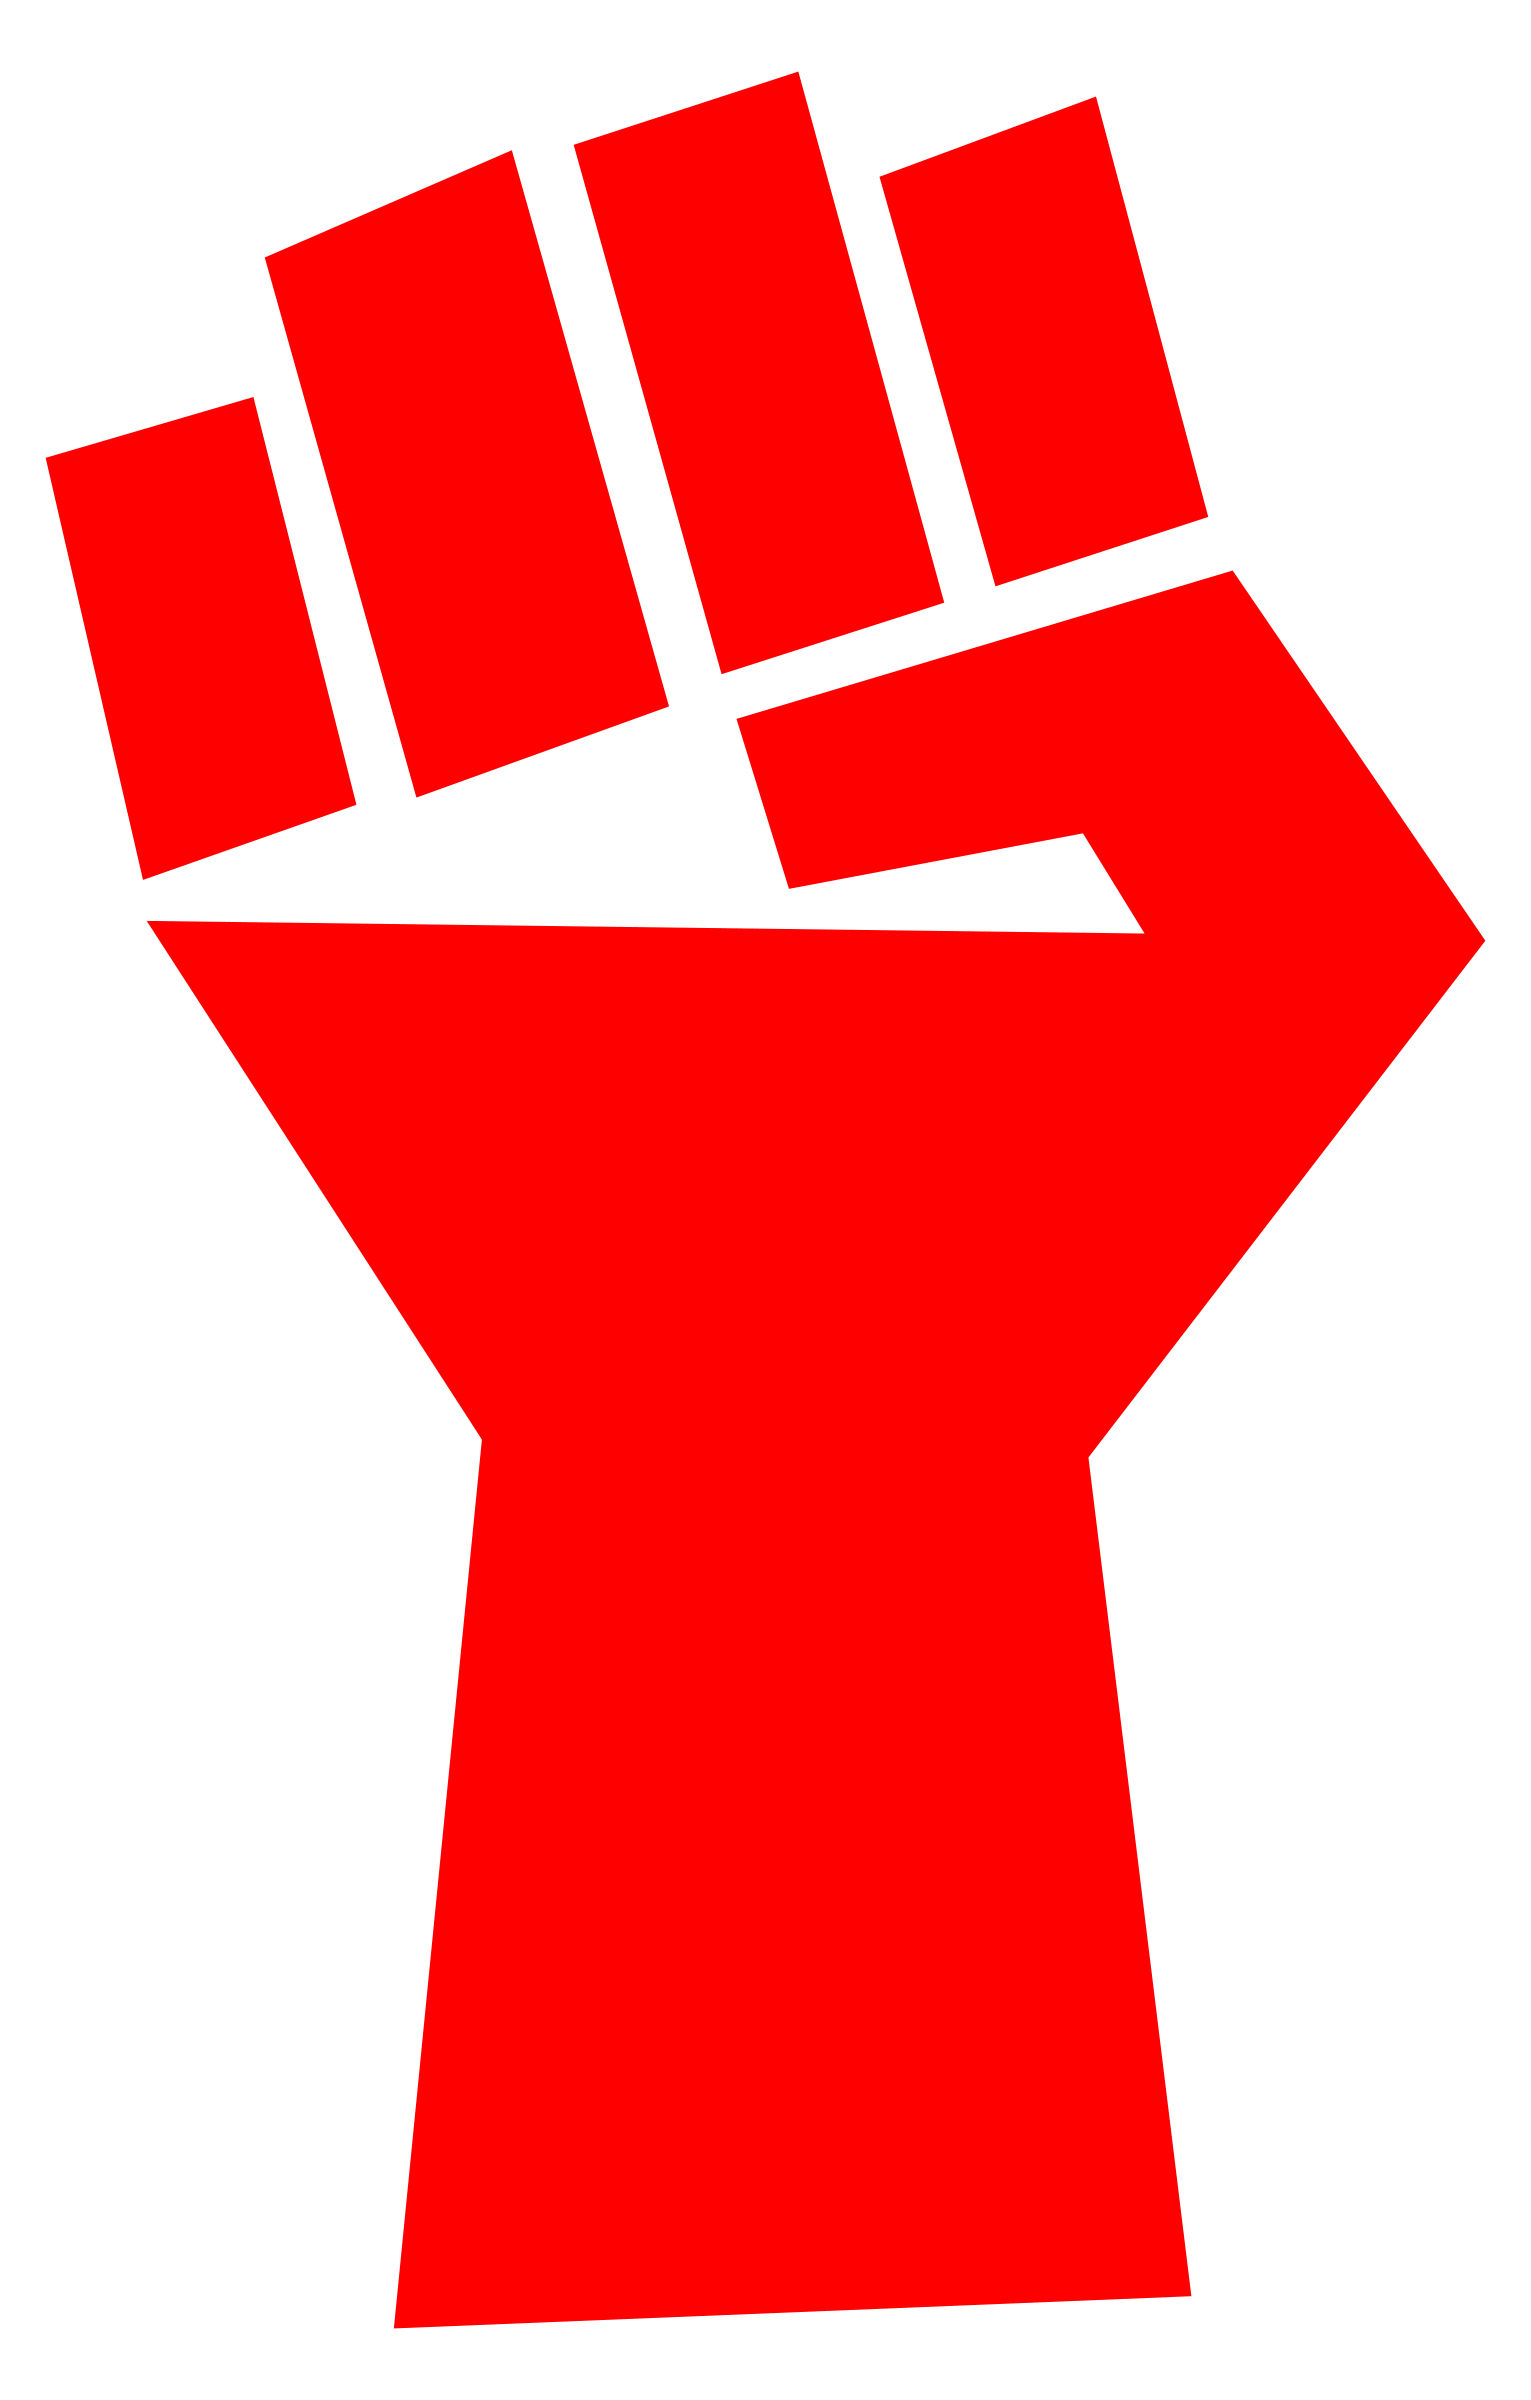 Clipart - Fist simple